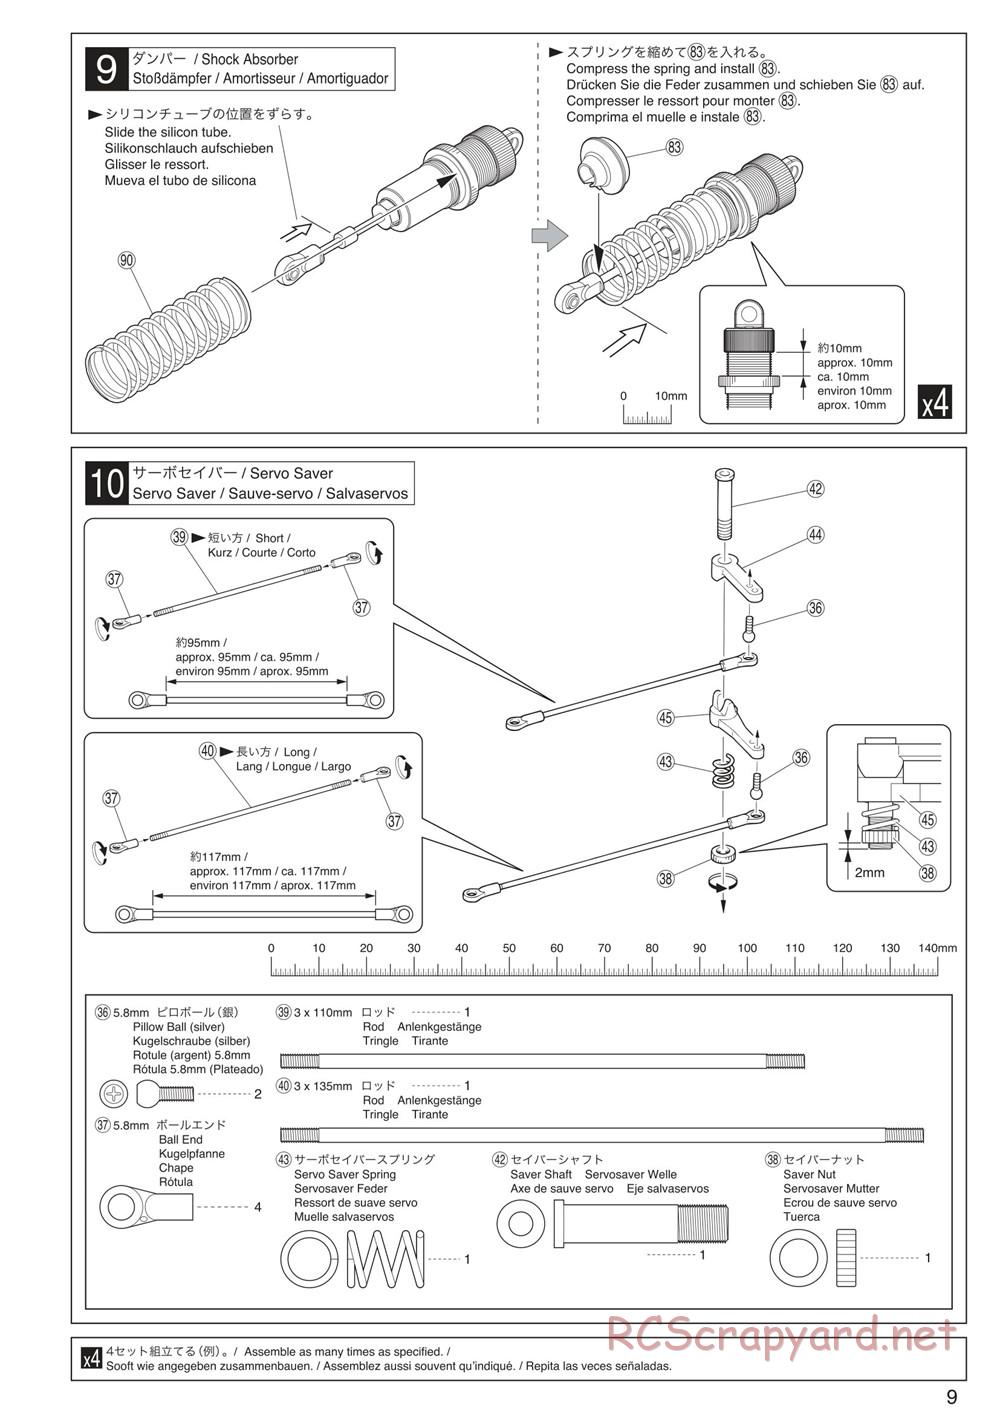 Kyosho - Mad Crusher VE - Manual - Page 9